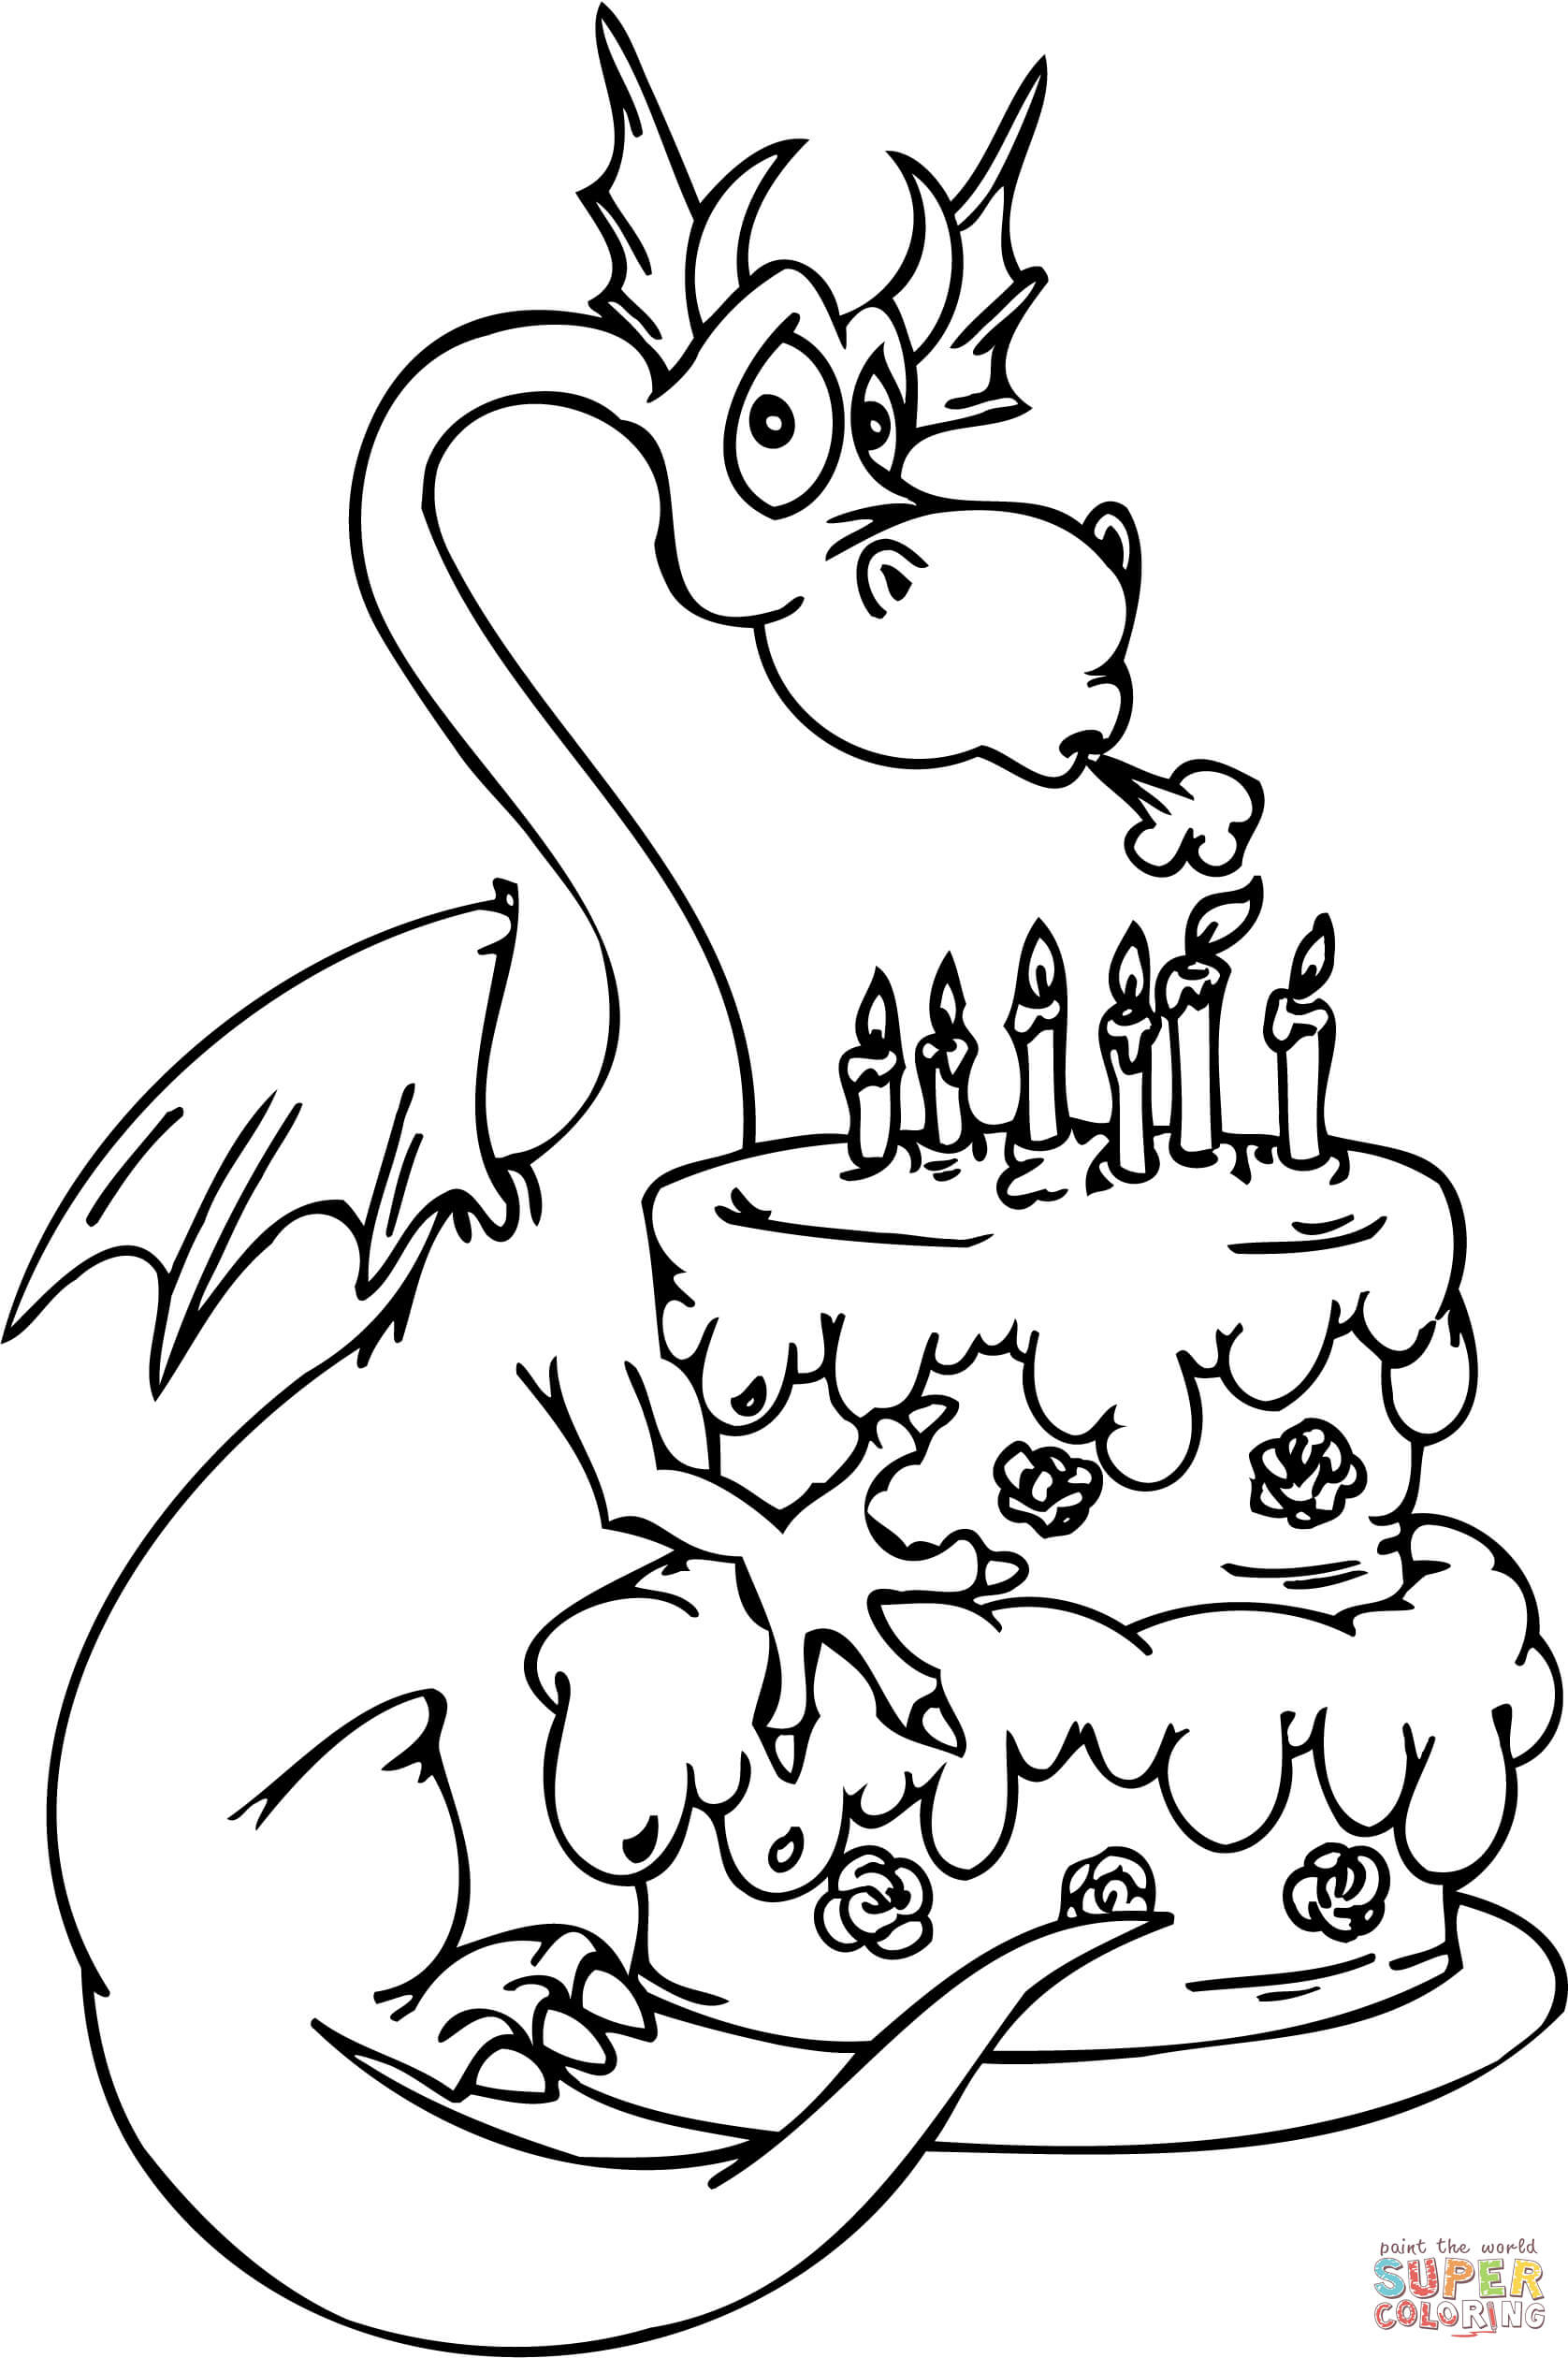 Dragon With Happy Birthday Cake Coloring Page | Free Printable - Free Printable Pictures Of Birthday Cakes